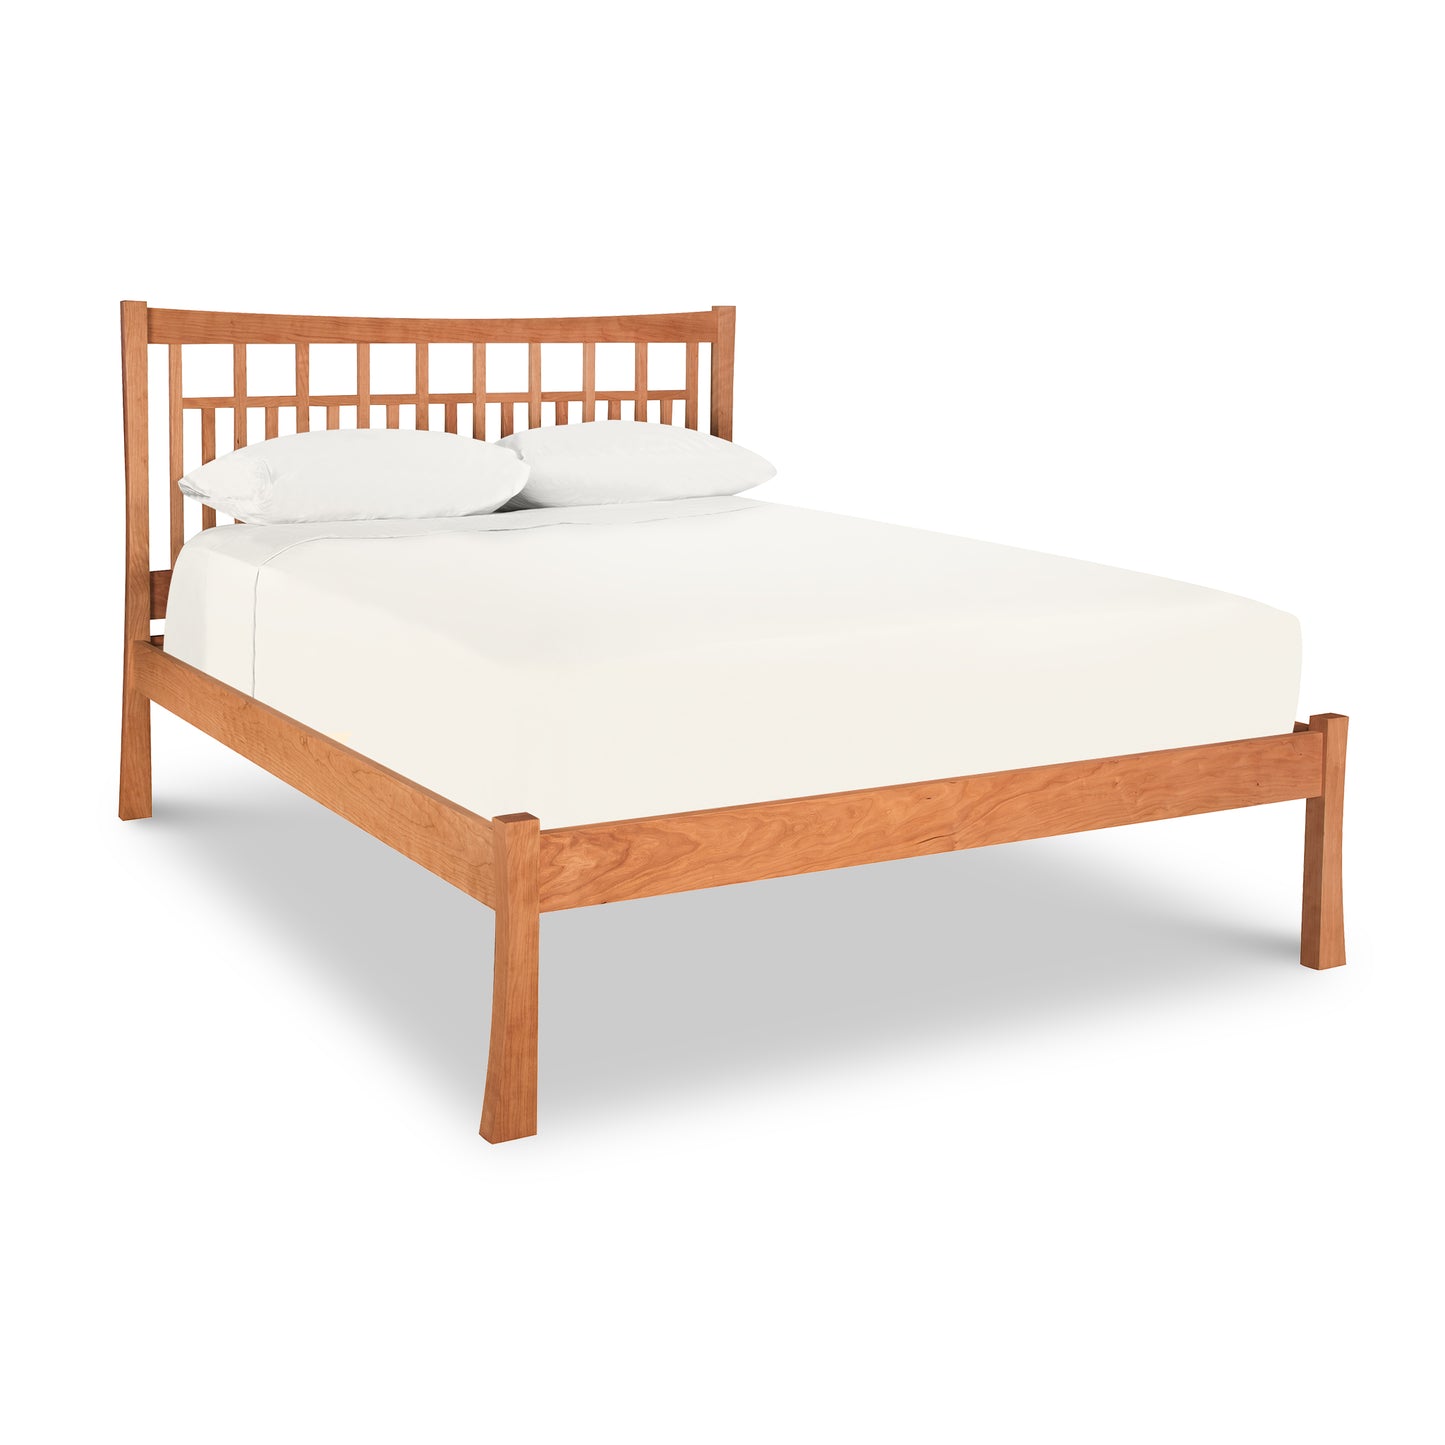 A Contemporary Craftsman Low Footboard Bed from the Vermont Furniture Designs bedroom collection with a white mattress and two pillows against a white background.